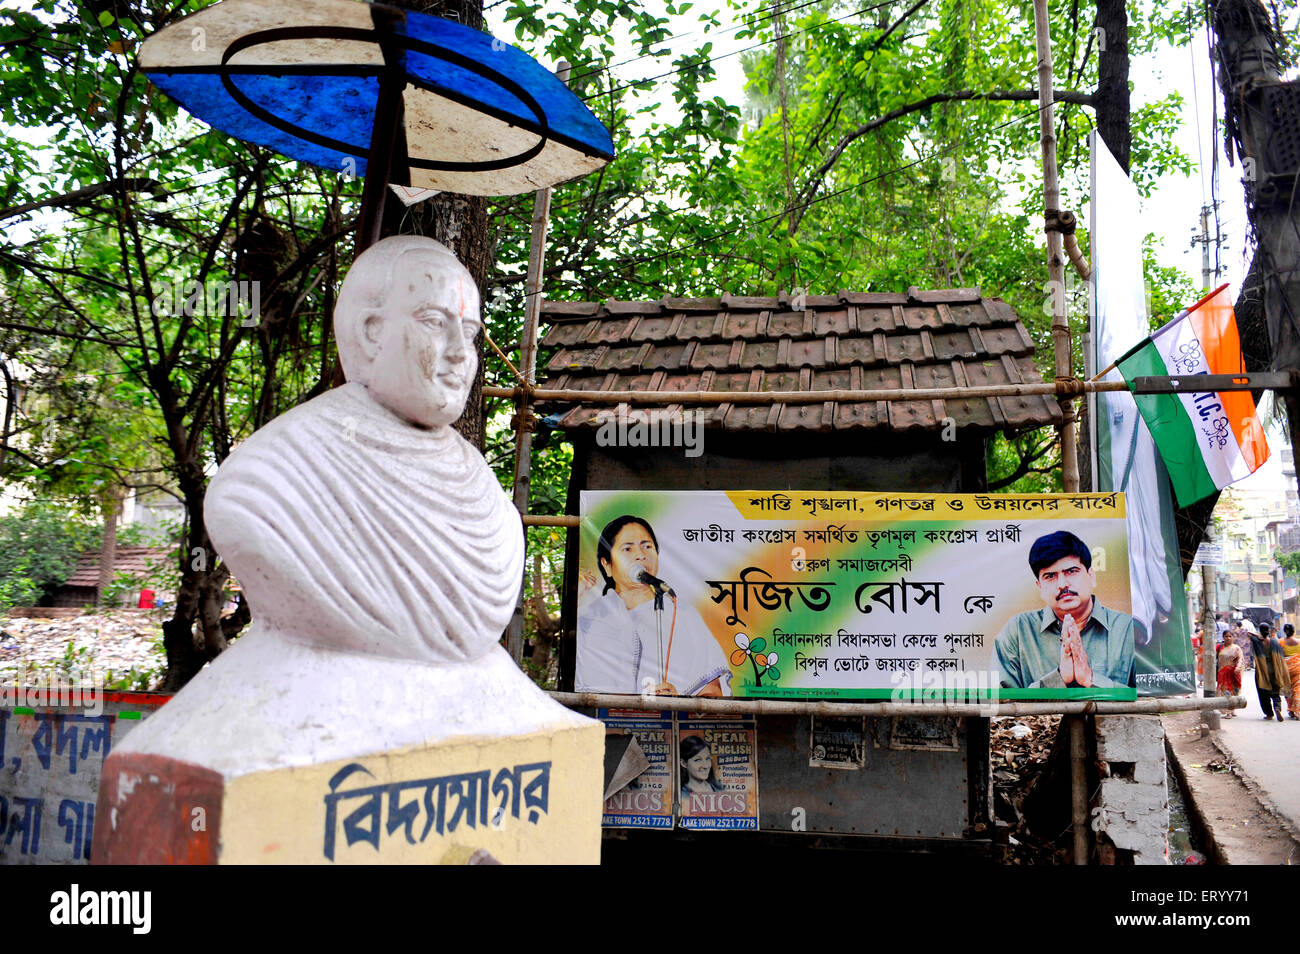 Election poster Trinamul Chief Mamta Banerjee calling people vote Justice poster significantly Statue Vidyasagar Bengal Stock Photo